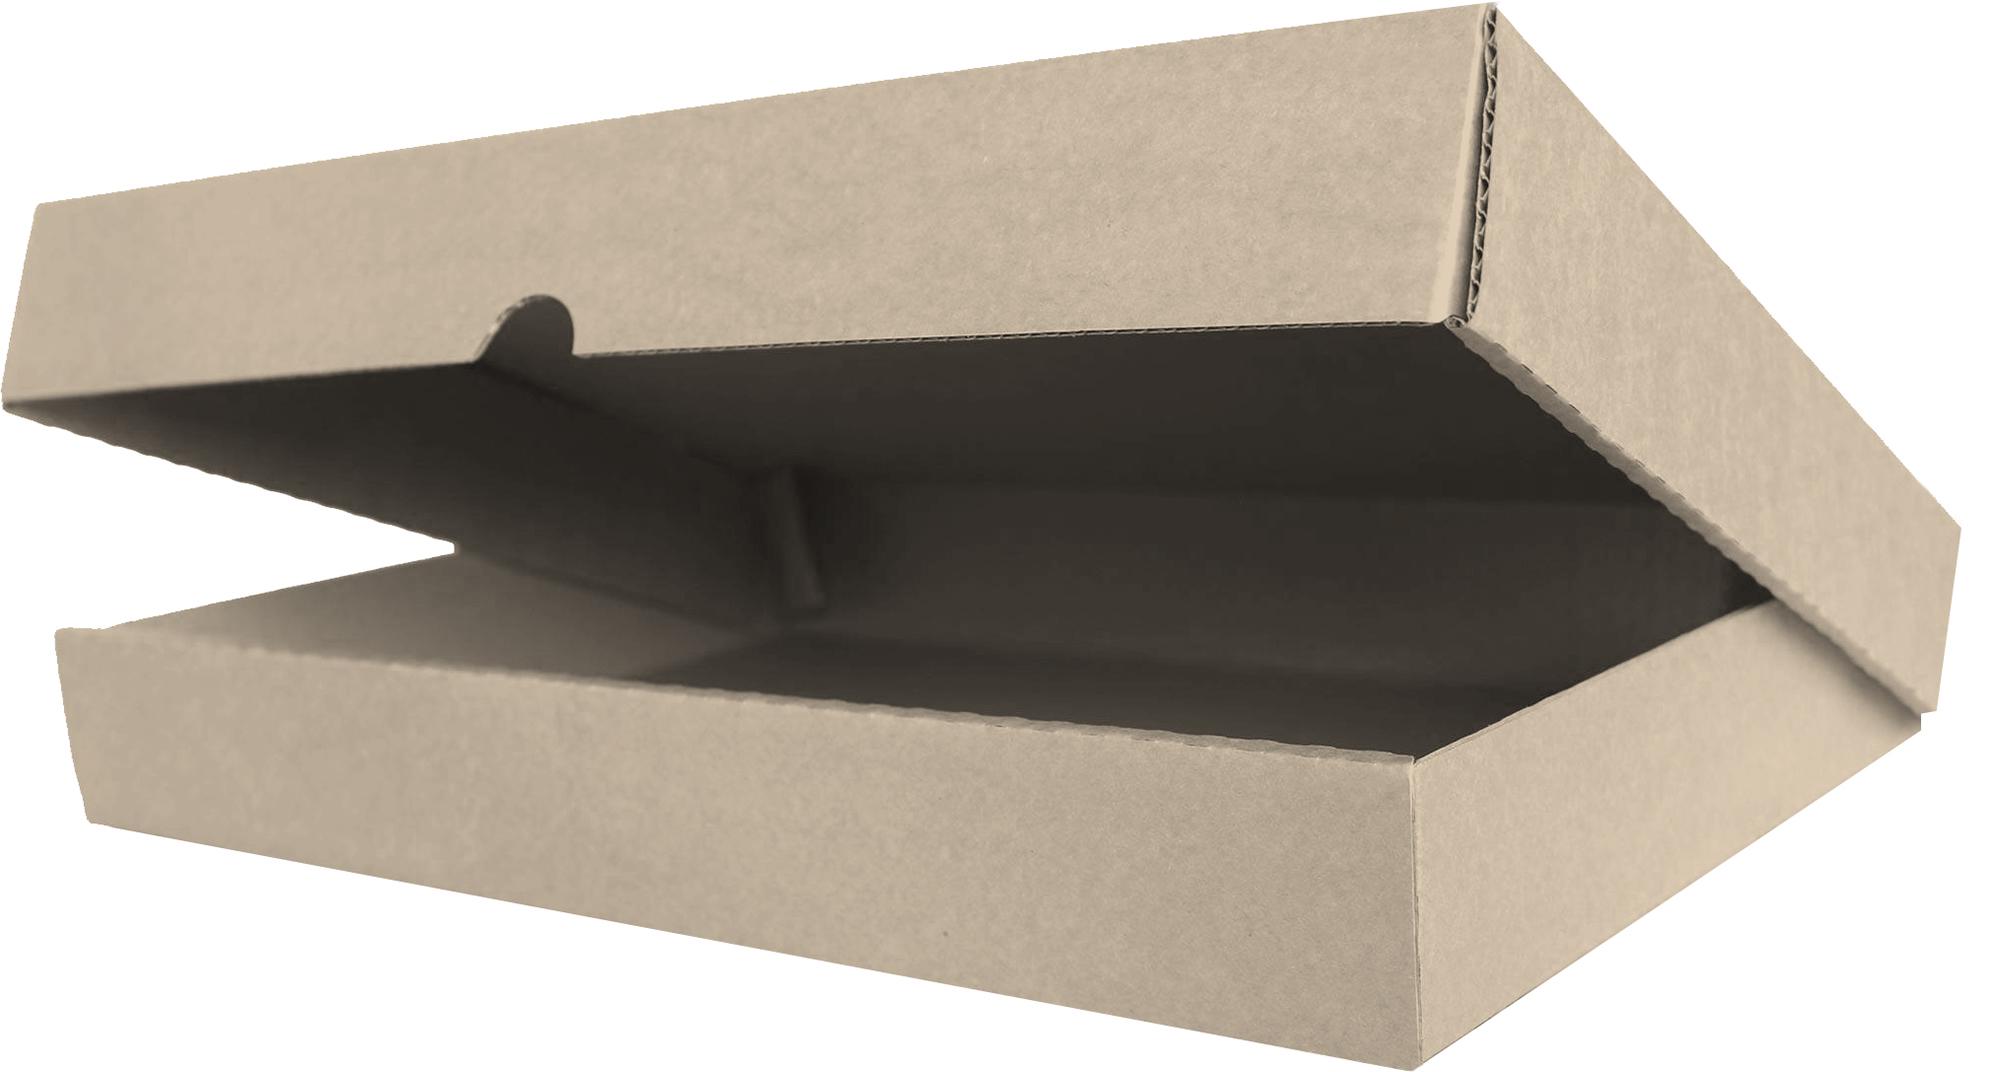 A4 Corrugated Archival Storage Box 315x245x60mm - Pack of 1 | Arrowfile |  The Archival & Collectable Storage Specialist